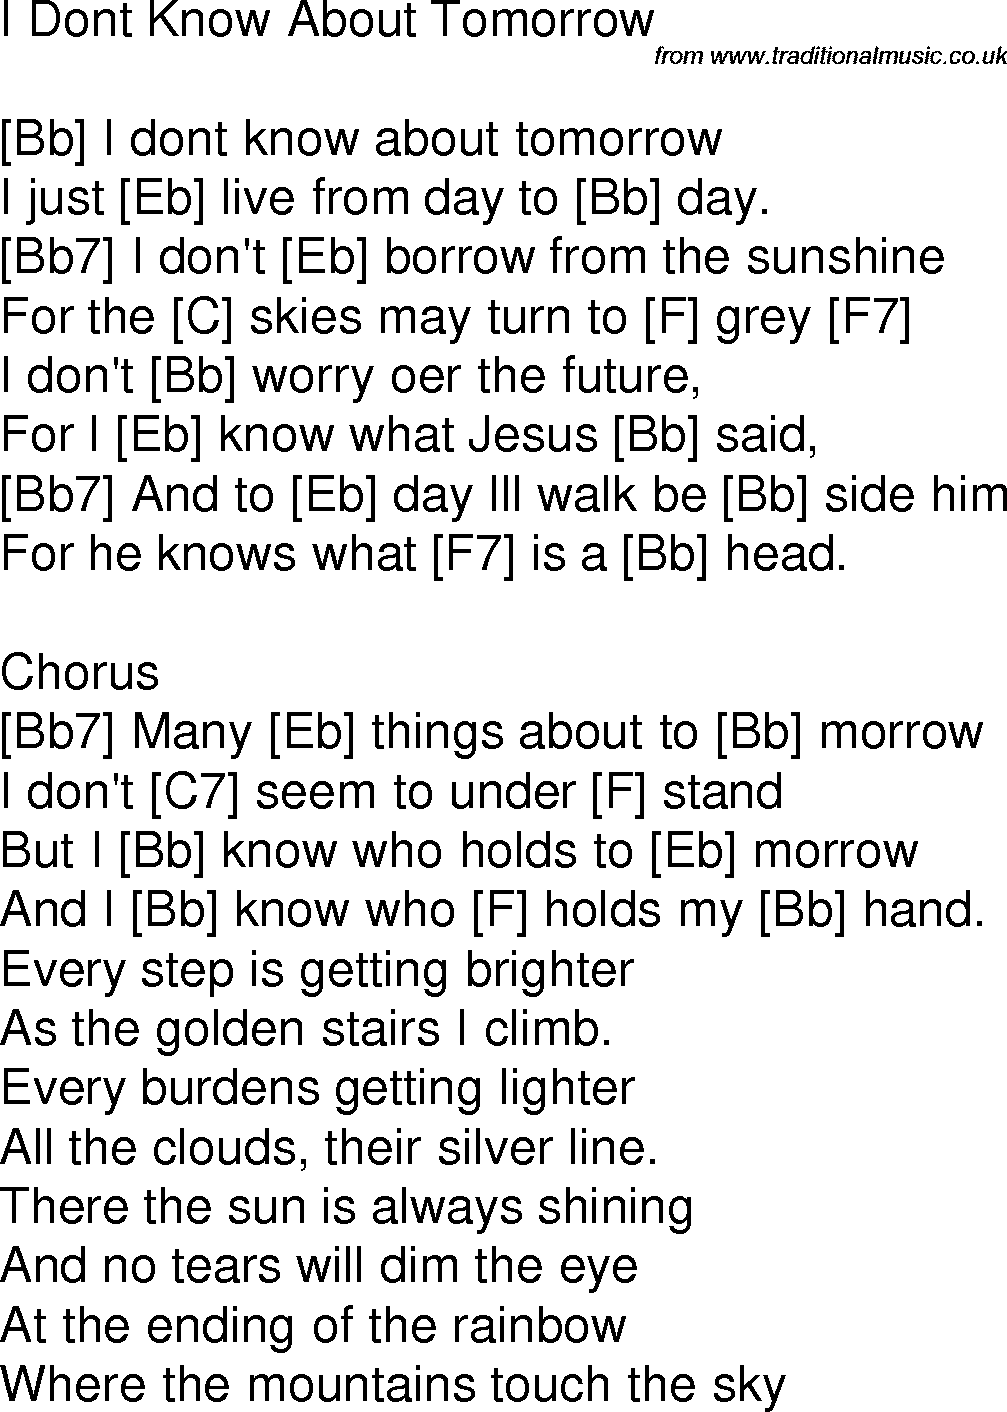 Old time song lyrics with chords for I Don't Know About Tomorrow Bb